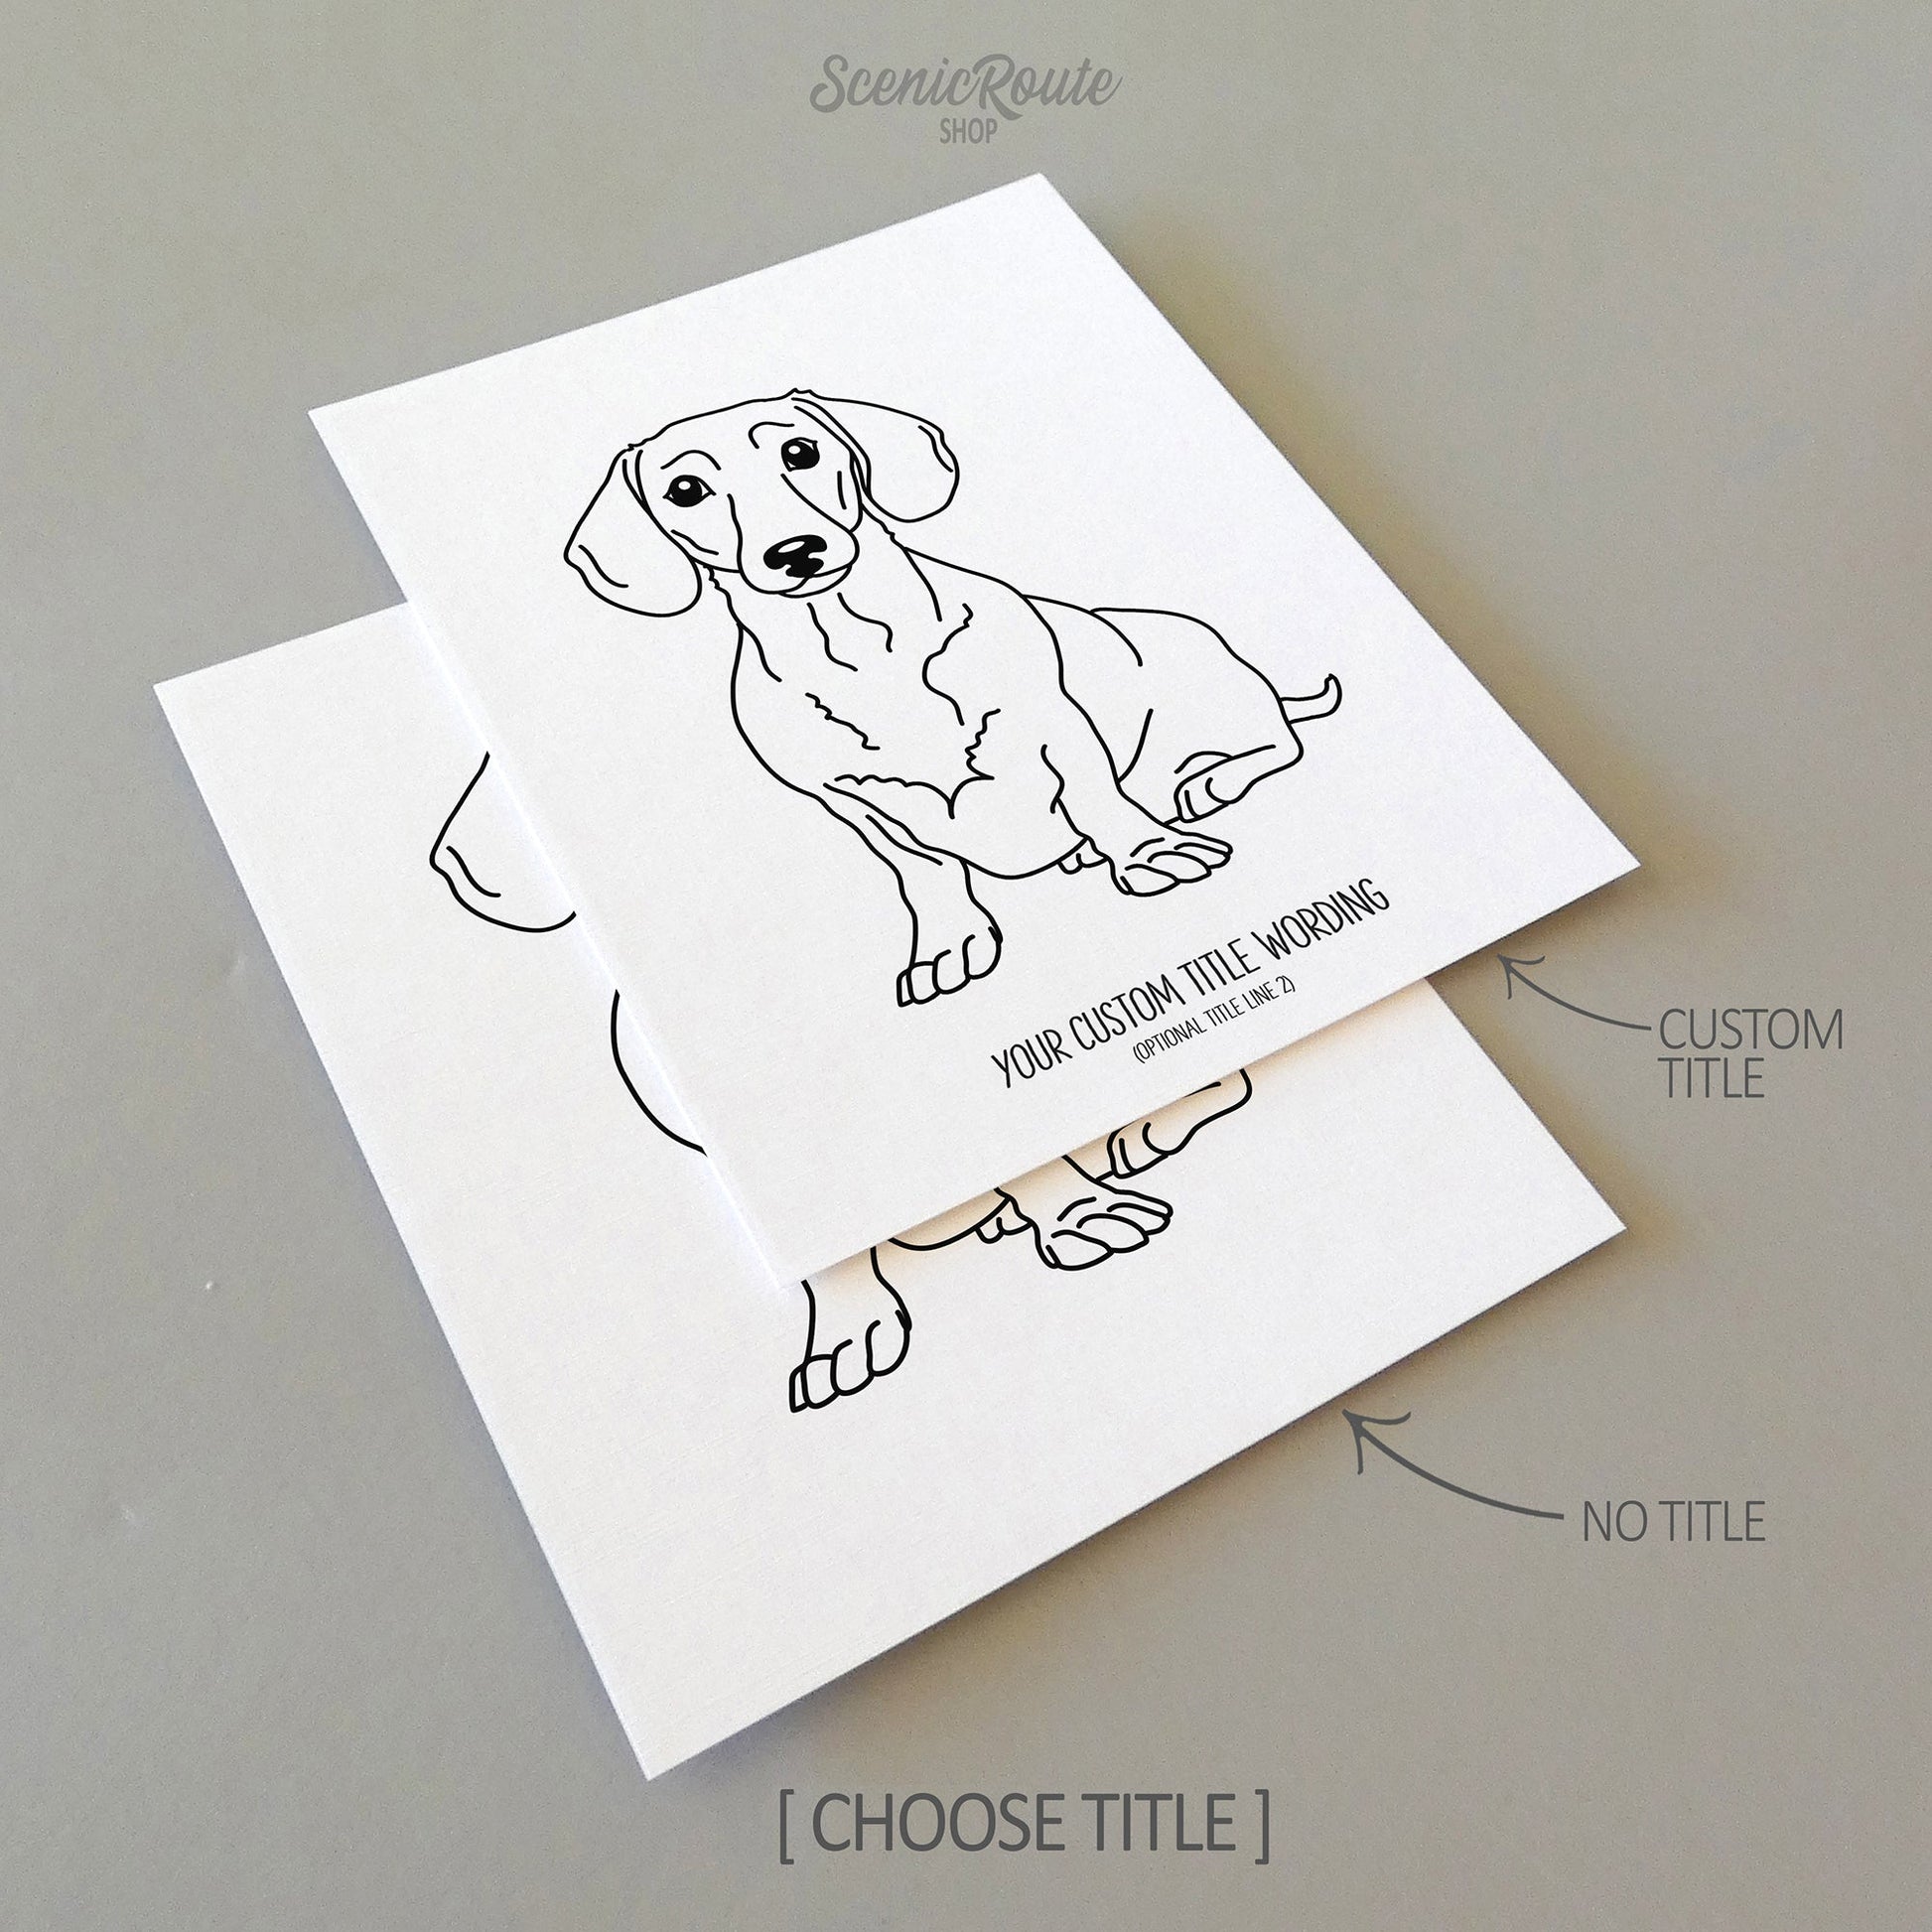 Two drawings of a Dachshund dog on white linen paper with a gray background.  Pieces are shown with “No Title” and “Custom Title” options to illustrate the available art print options.